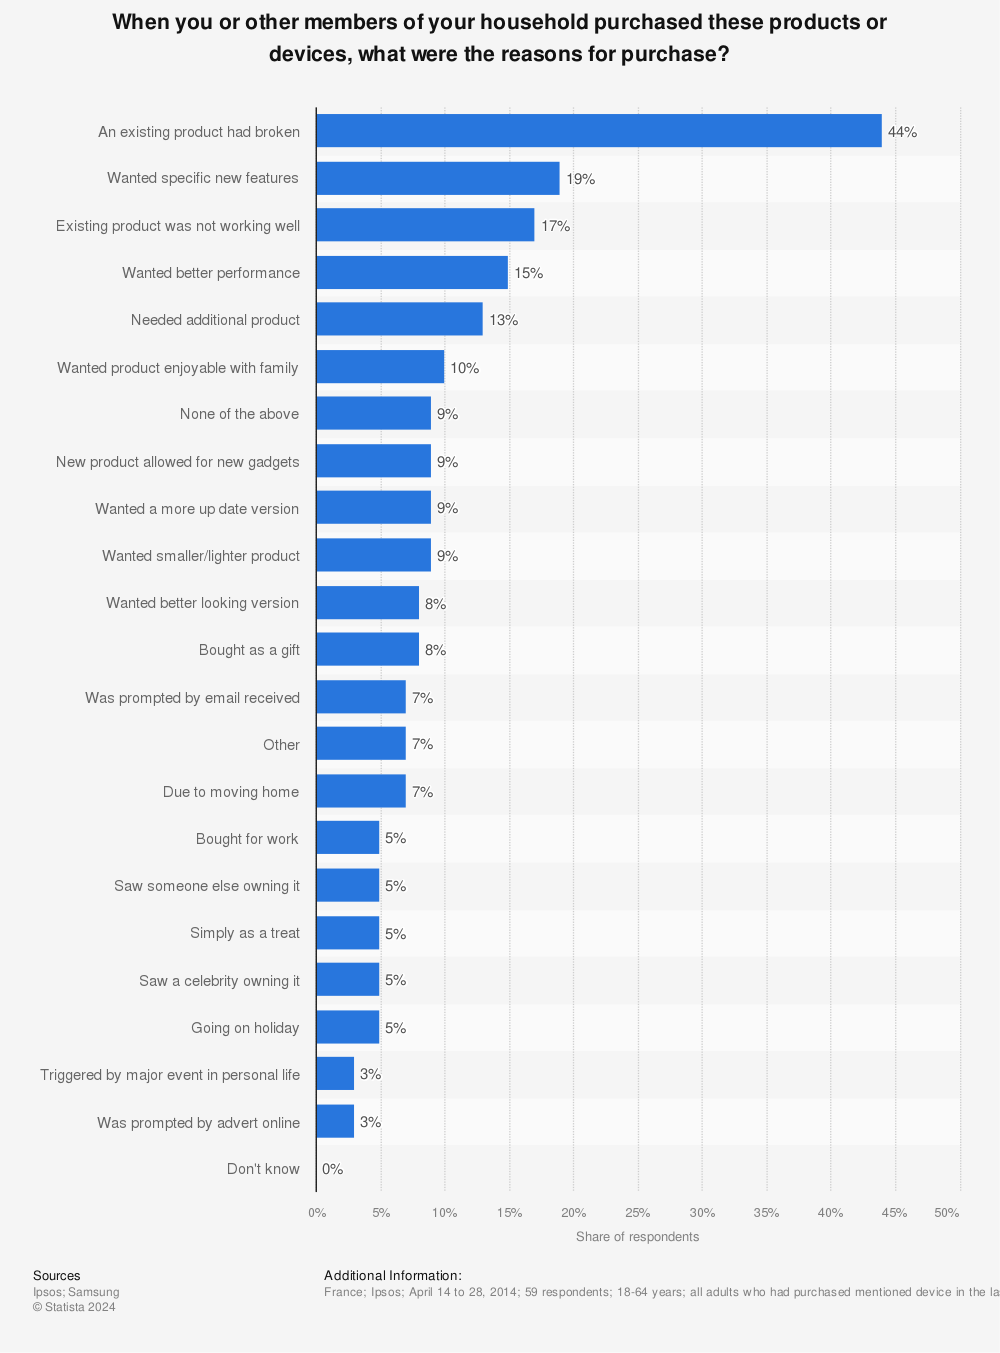 Statistic: When you or other members of your household purchased these products or devices, what were the reasons for purchase? | Statista